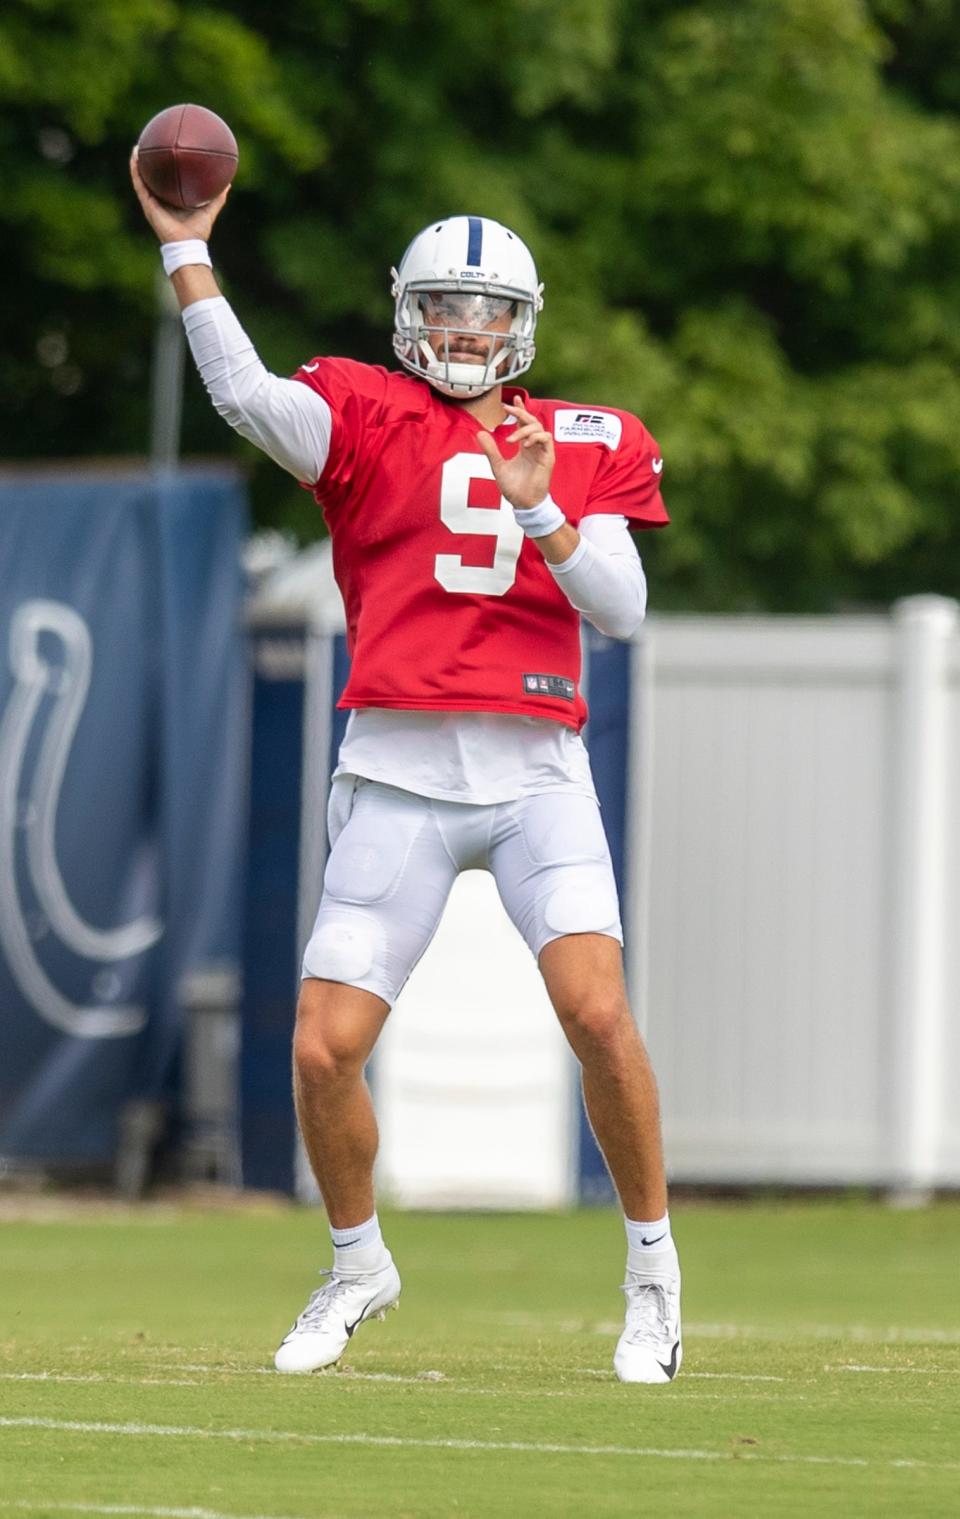 Quarterback Jacob Eason during Colts training camp, from their facility in Indianapolis, Monday, Aug. 17, 2020.